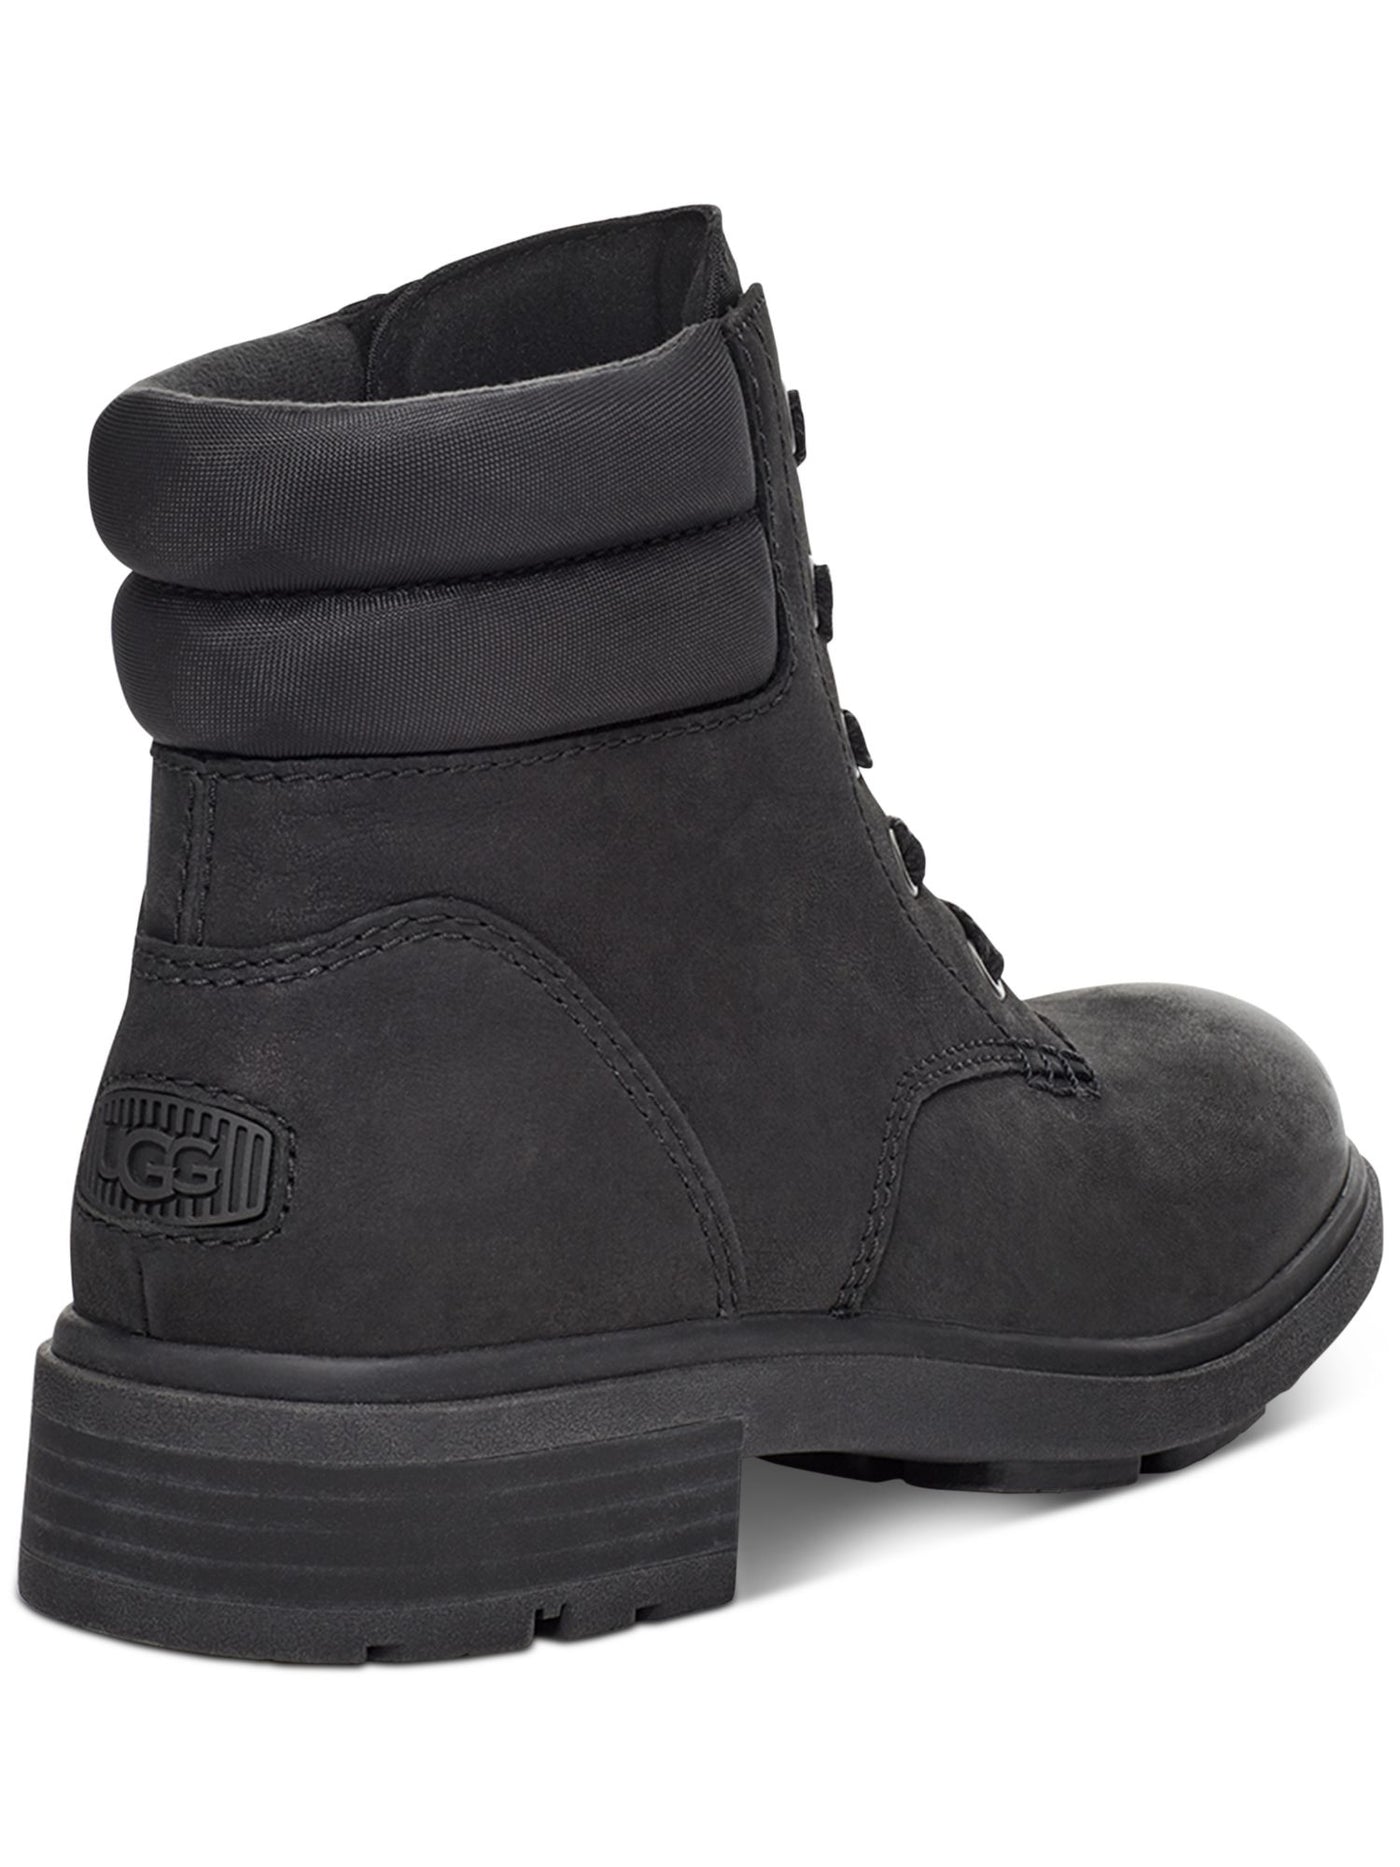 UGG Womens Black Waterproof Cushioned Harrison Round Toe Block Heel Lace-Up Leather Booties 7